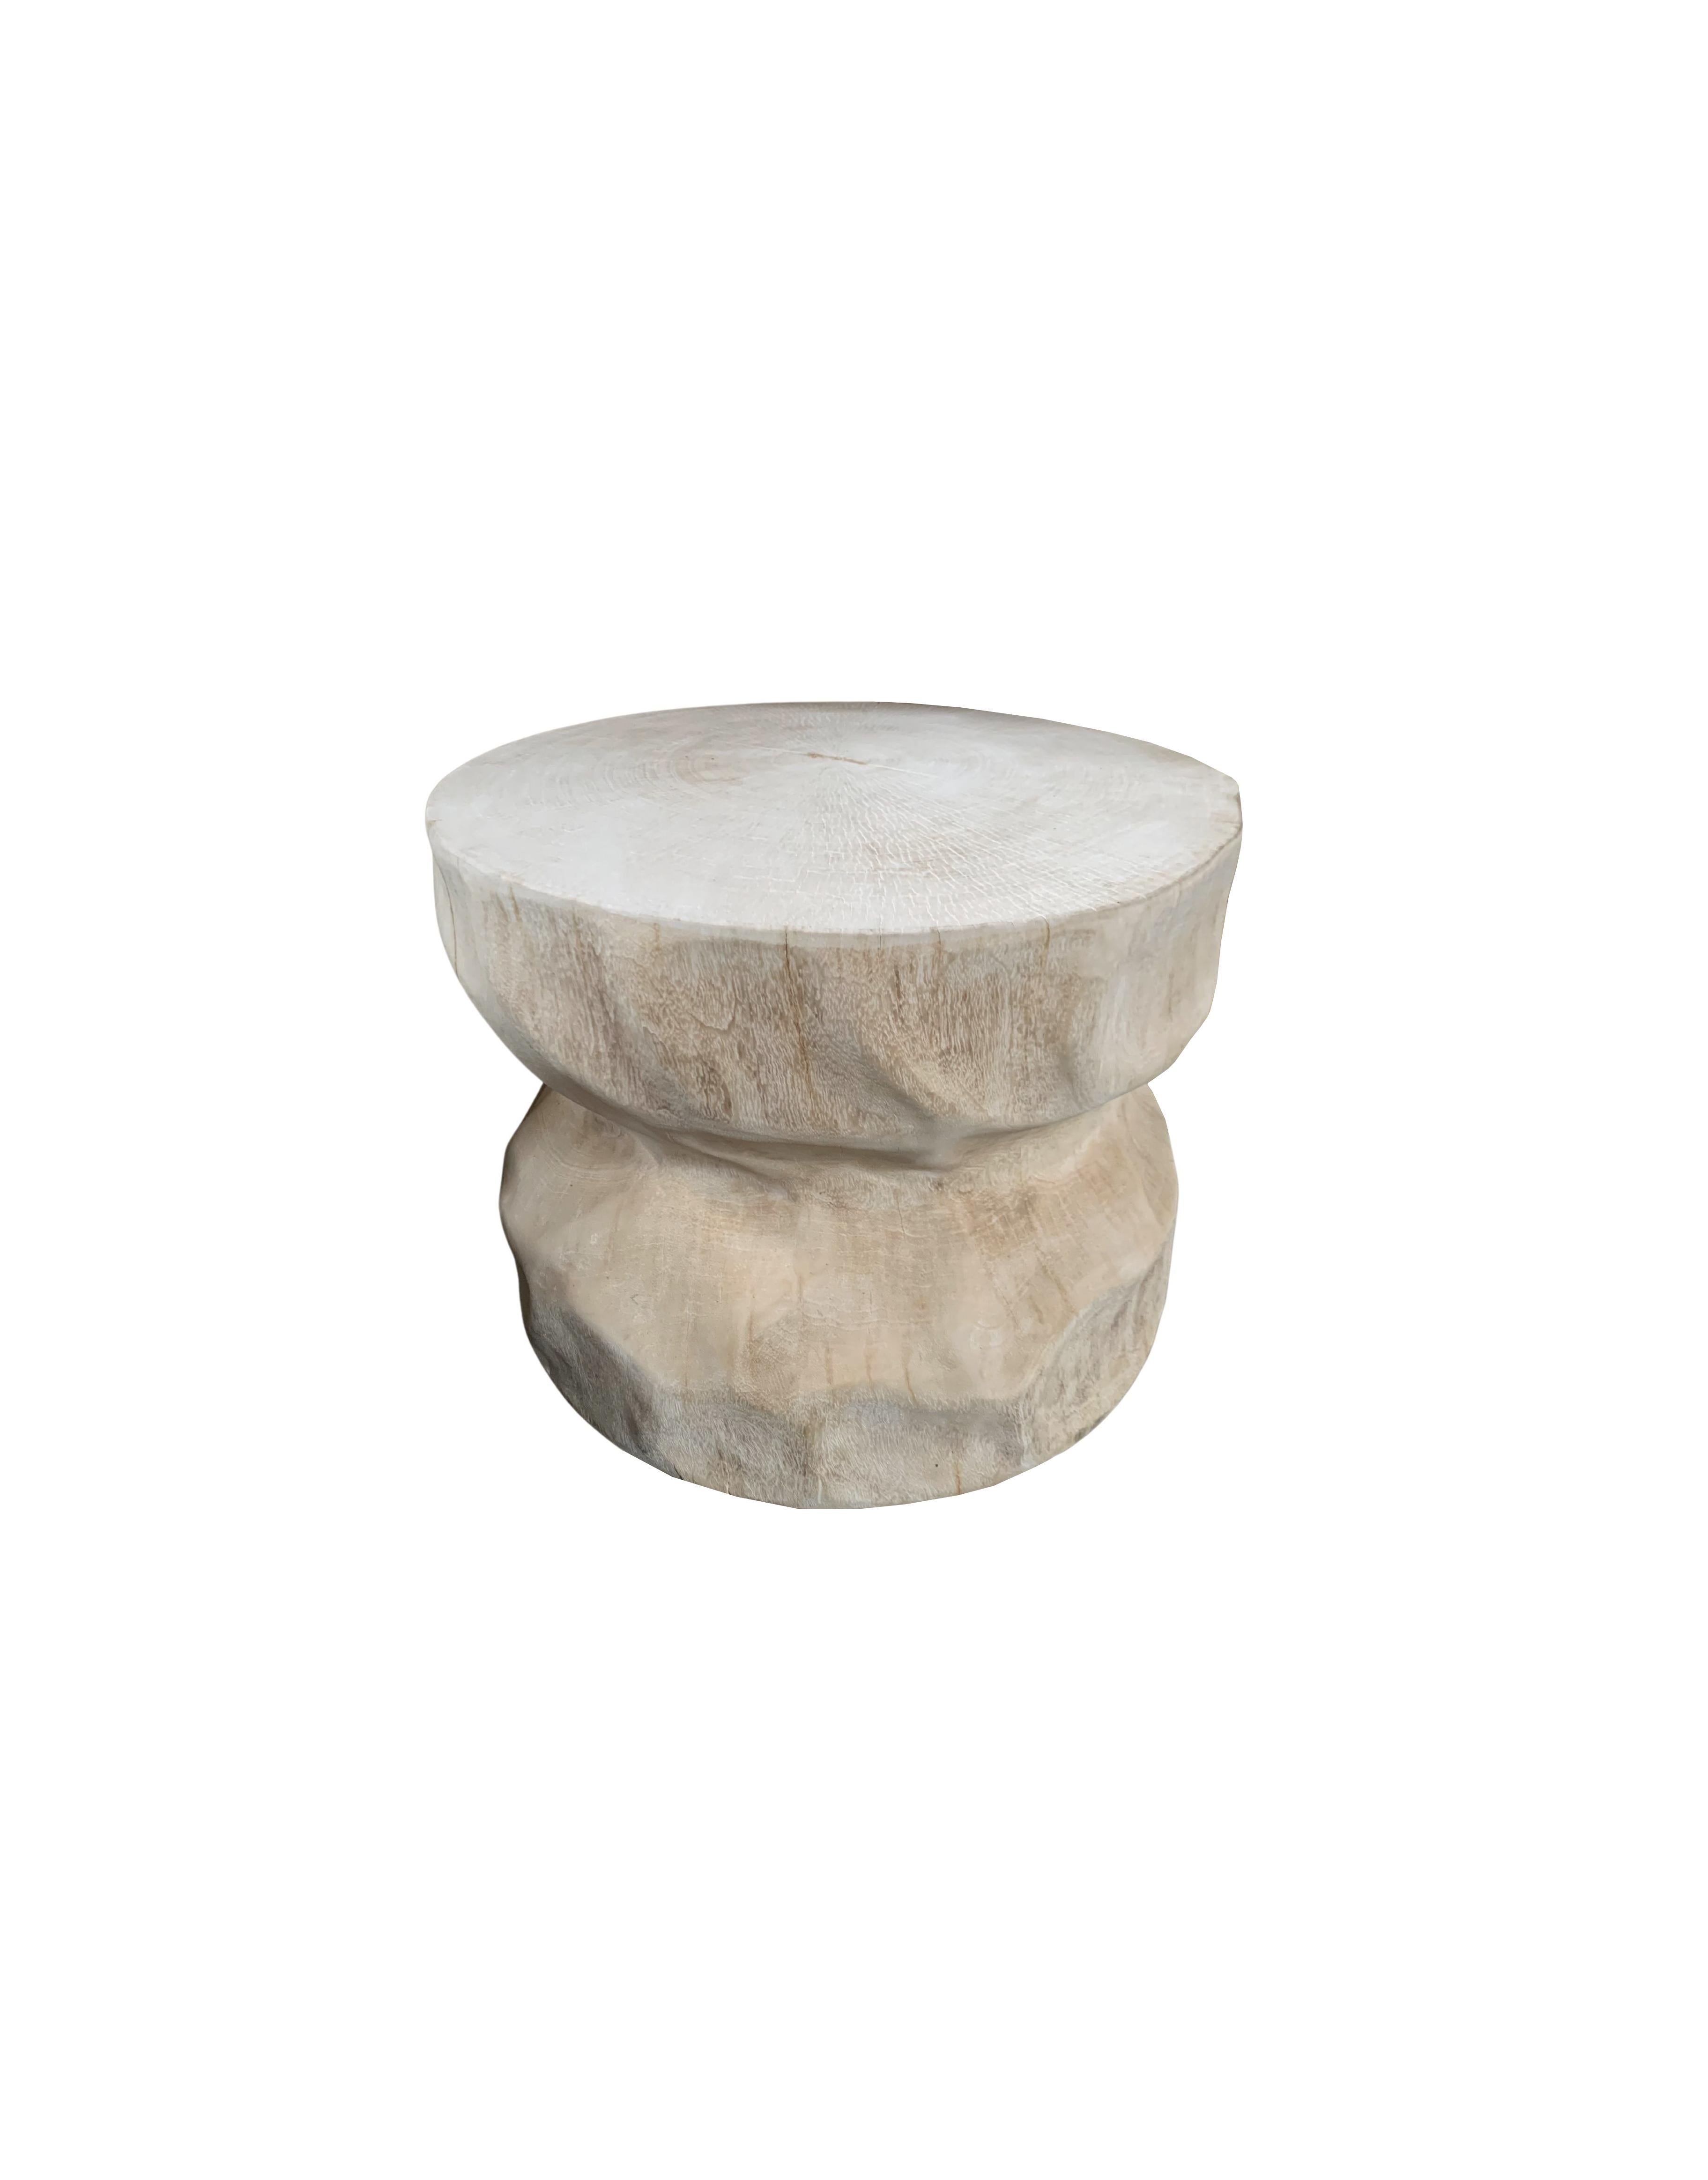 This wonderfully sculptural round side table features a ribbed & spiral pattern along its sides. The table's neutral pigment makes it perfect for any space. A uniquely sculptural and versatile piece certain to invoke conversation. It was crafted